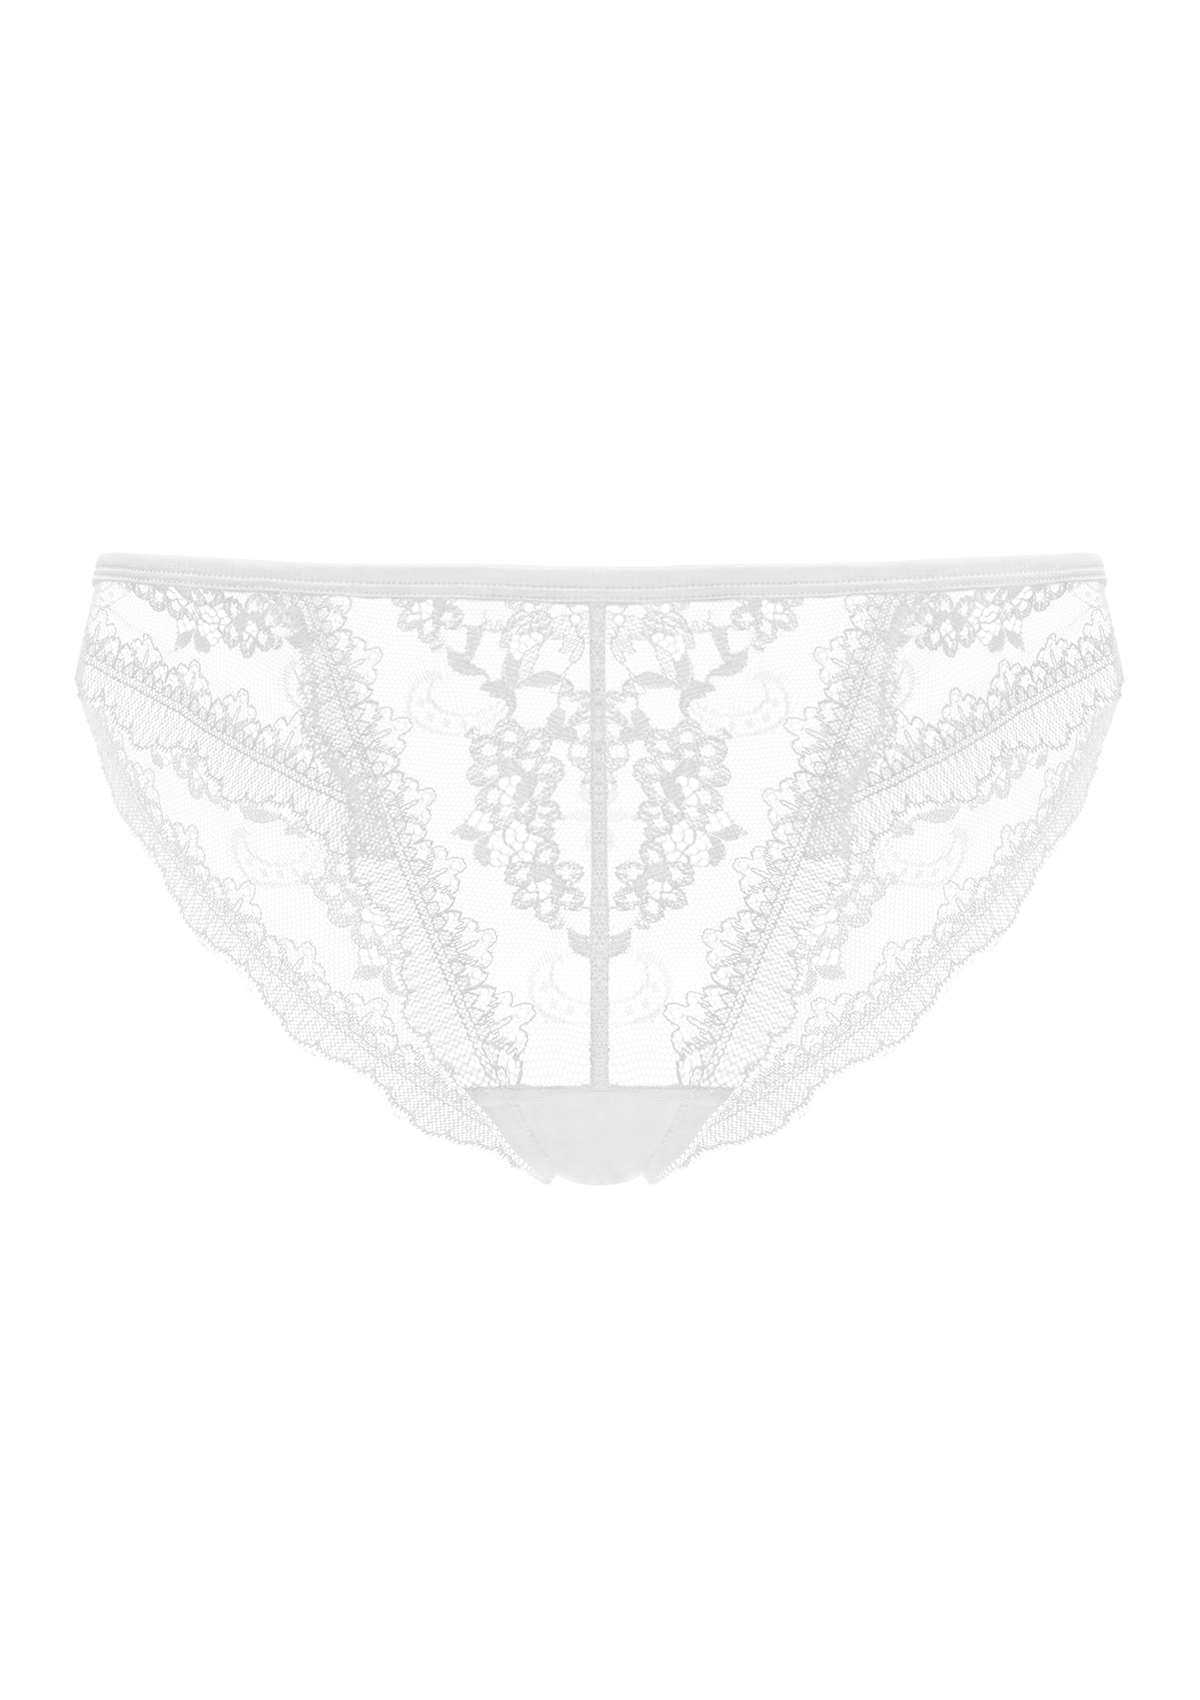 HSIA Floral Bridal Lace Back Intricate Stylish Cheeky Underwear  - White / S